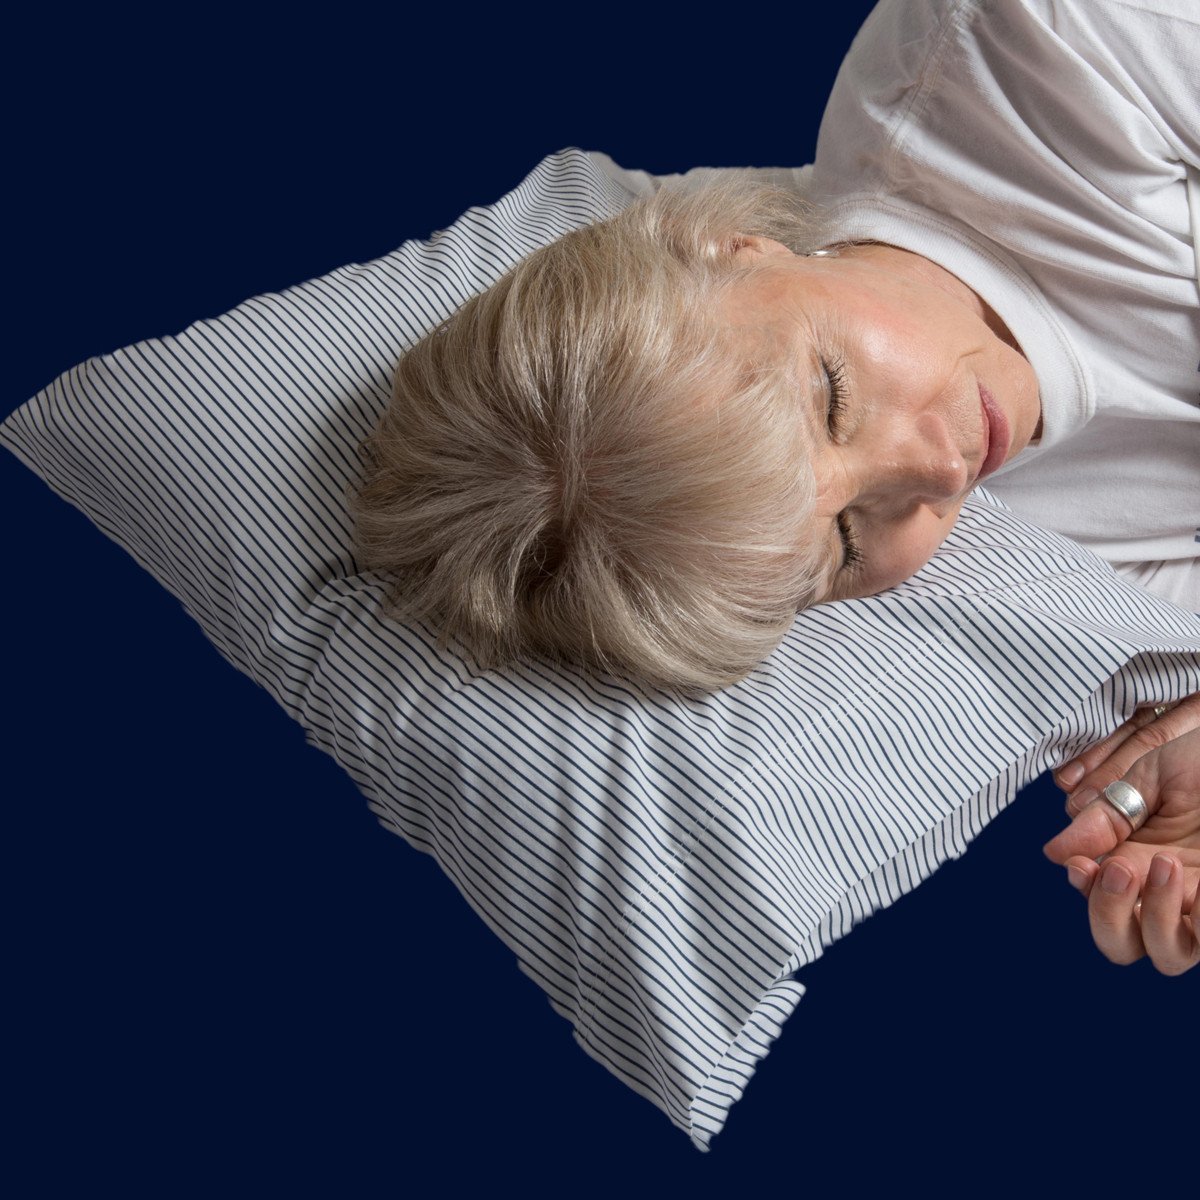 A women is sleeping comfortably on a Pillowpacker inflatible travel pillow in a crisp Navy on white home-style pillowcase